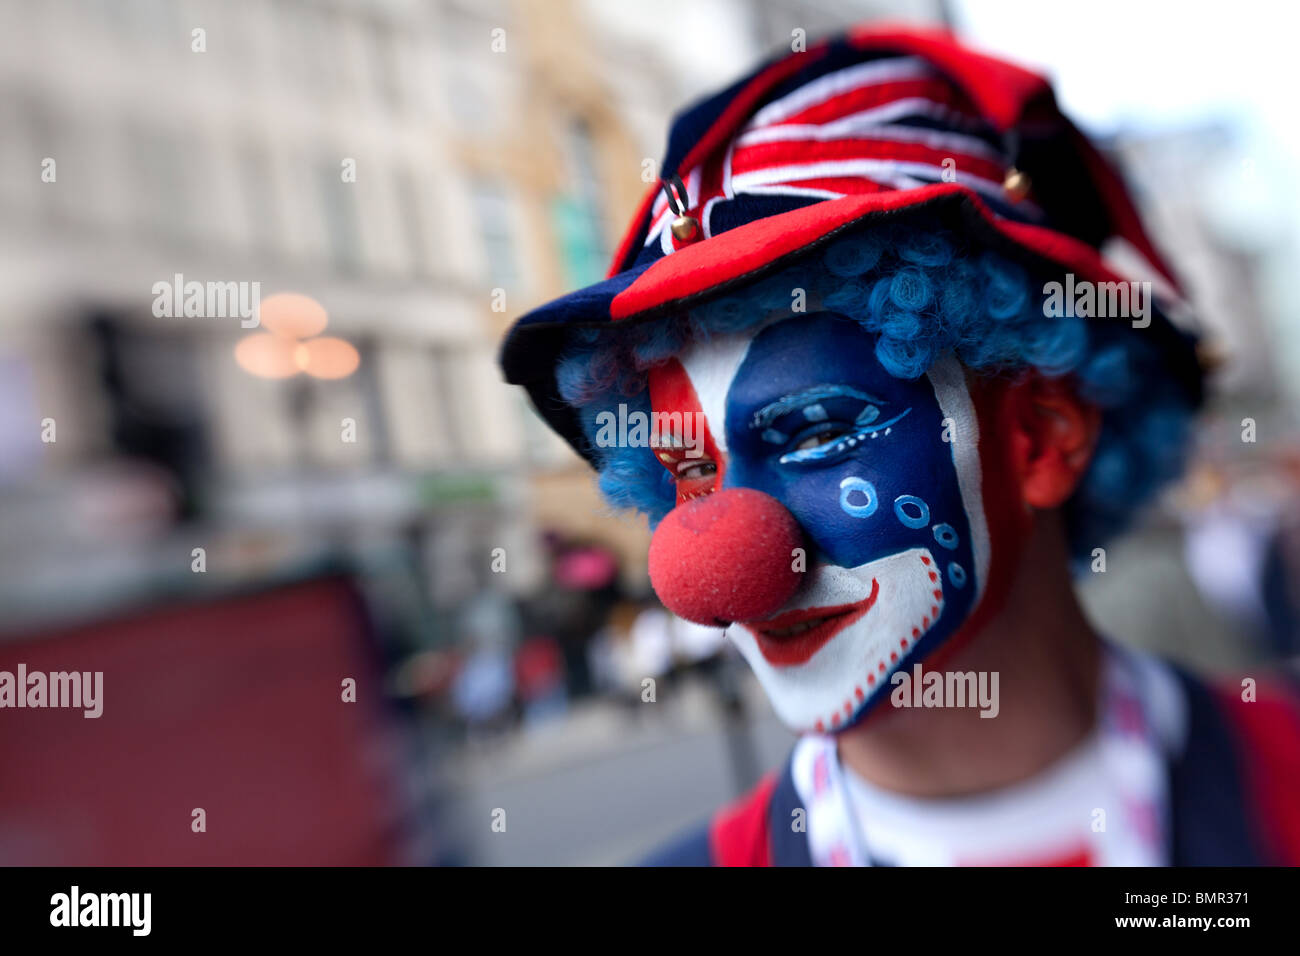 A clown dressed in the colours of the British flag in Piccadilly Circus, London, England. Stock Photo